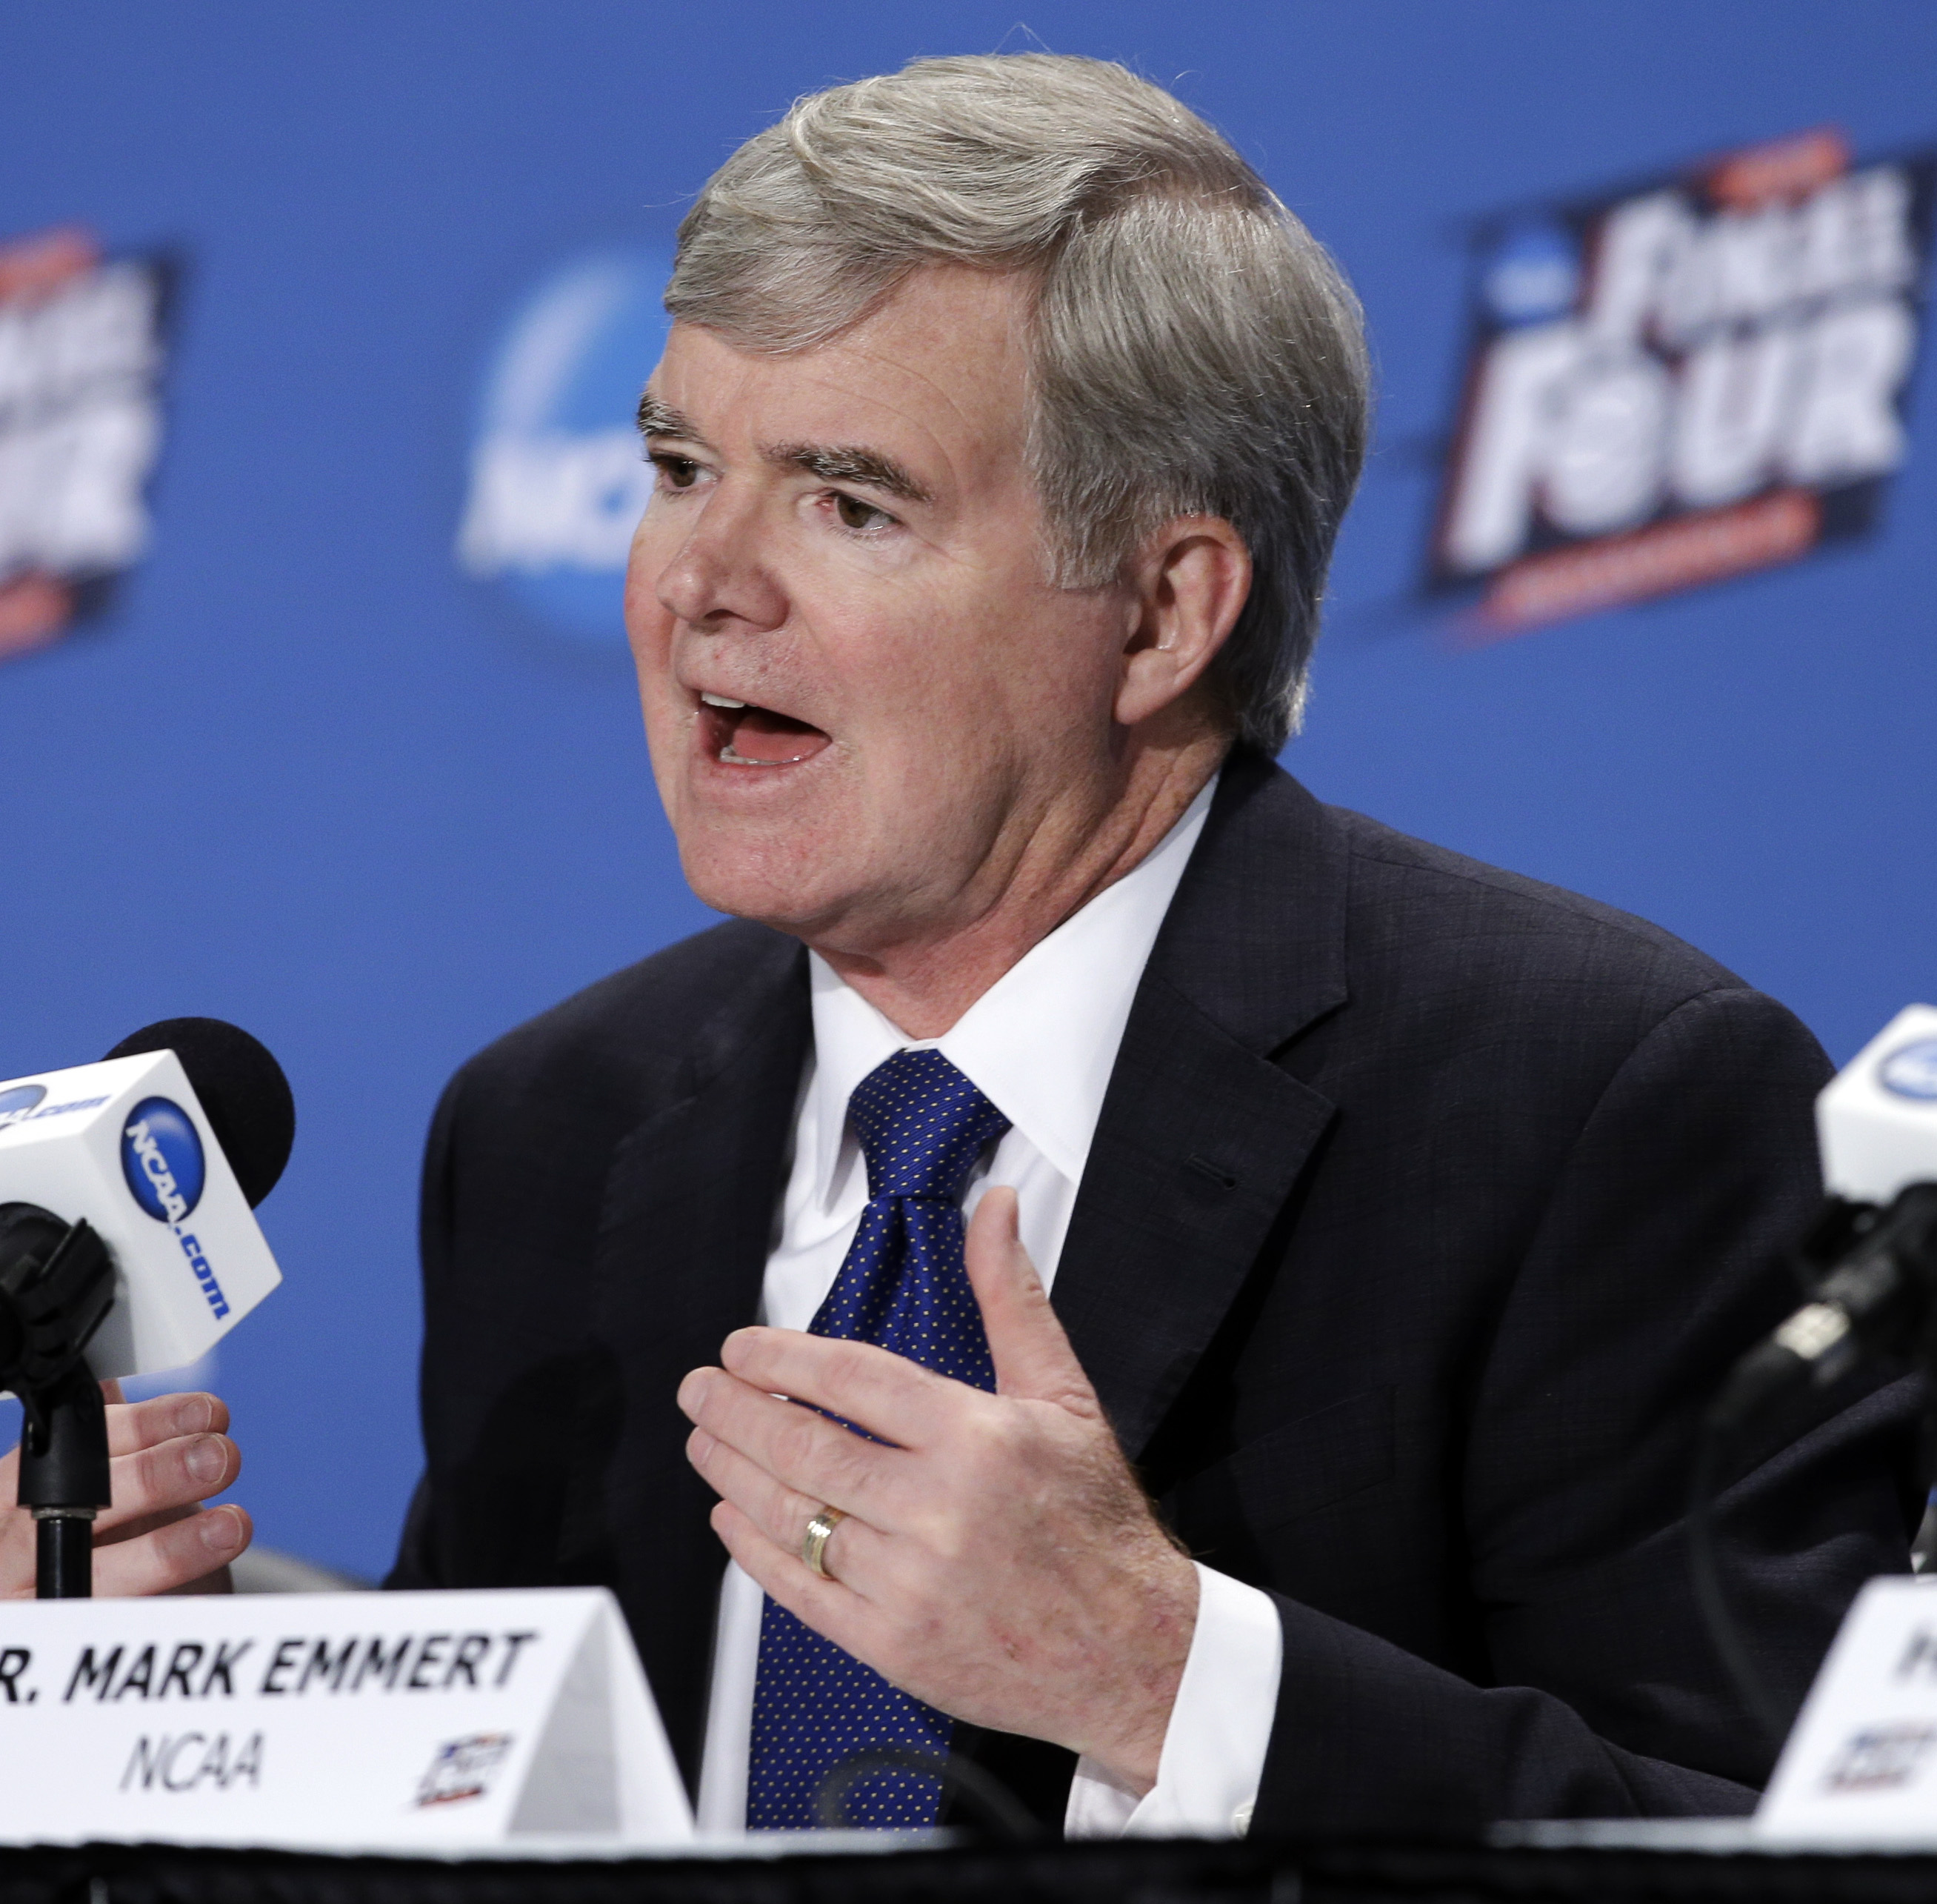 NCAA President Mark Emmert answers questions during a news conference at the Men's Final Four college basketball tournament Thursday, April 2, 2015, in Indianapolis. (AP Photo/Darron Cummings)